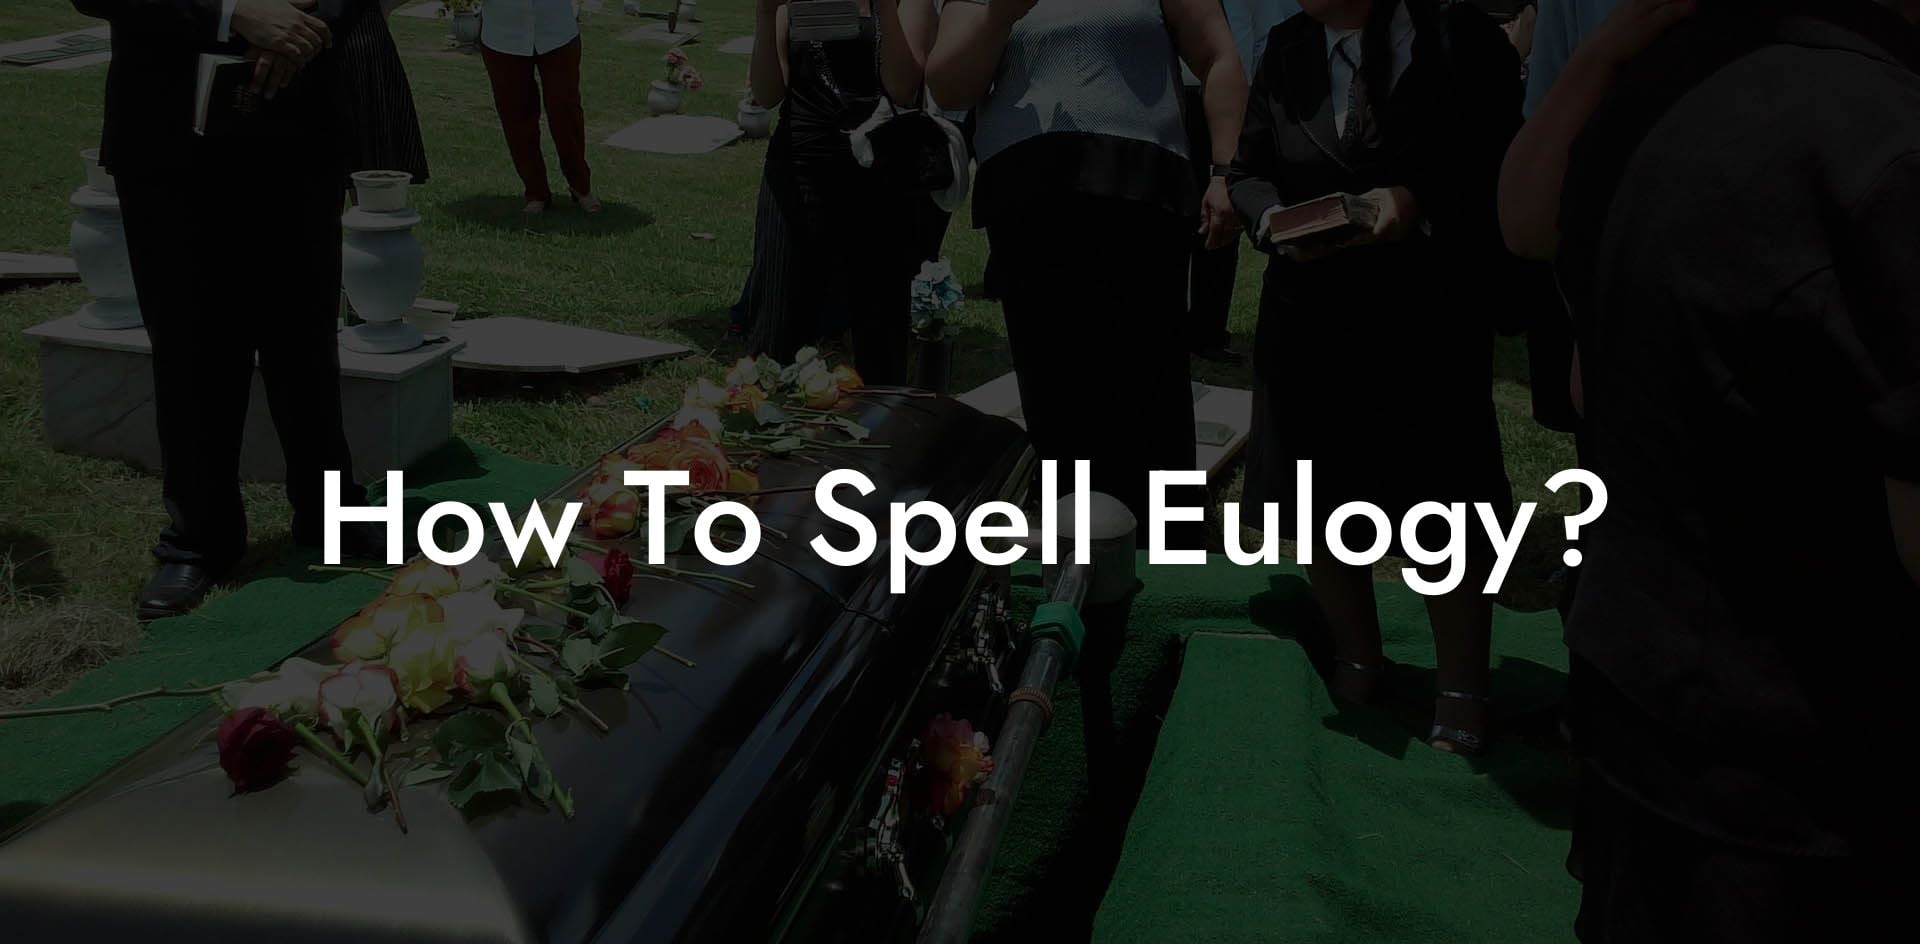 How To Spell Eulogy?